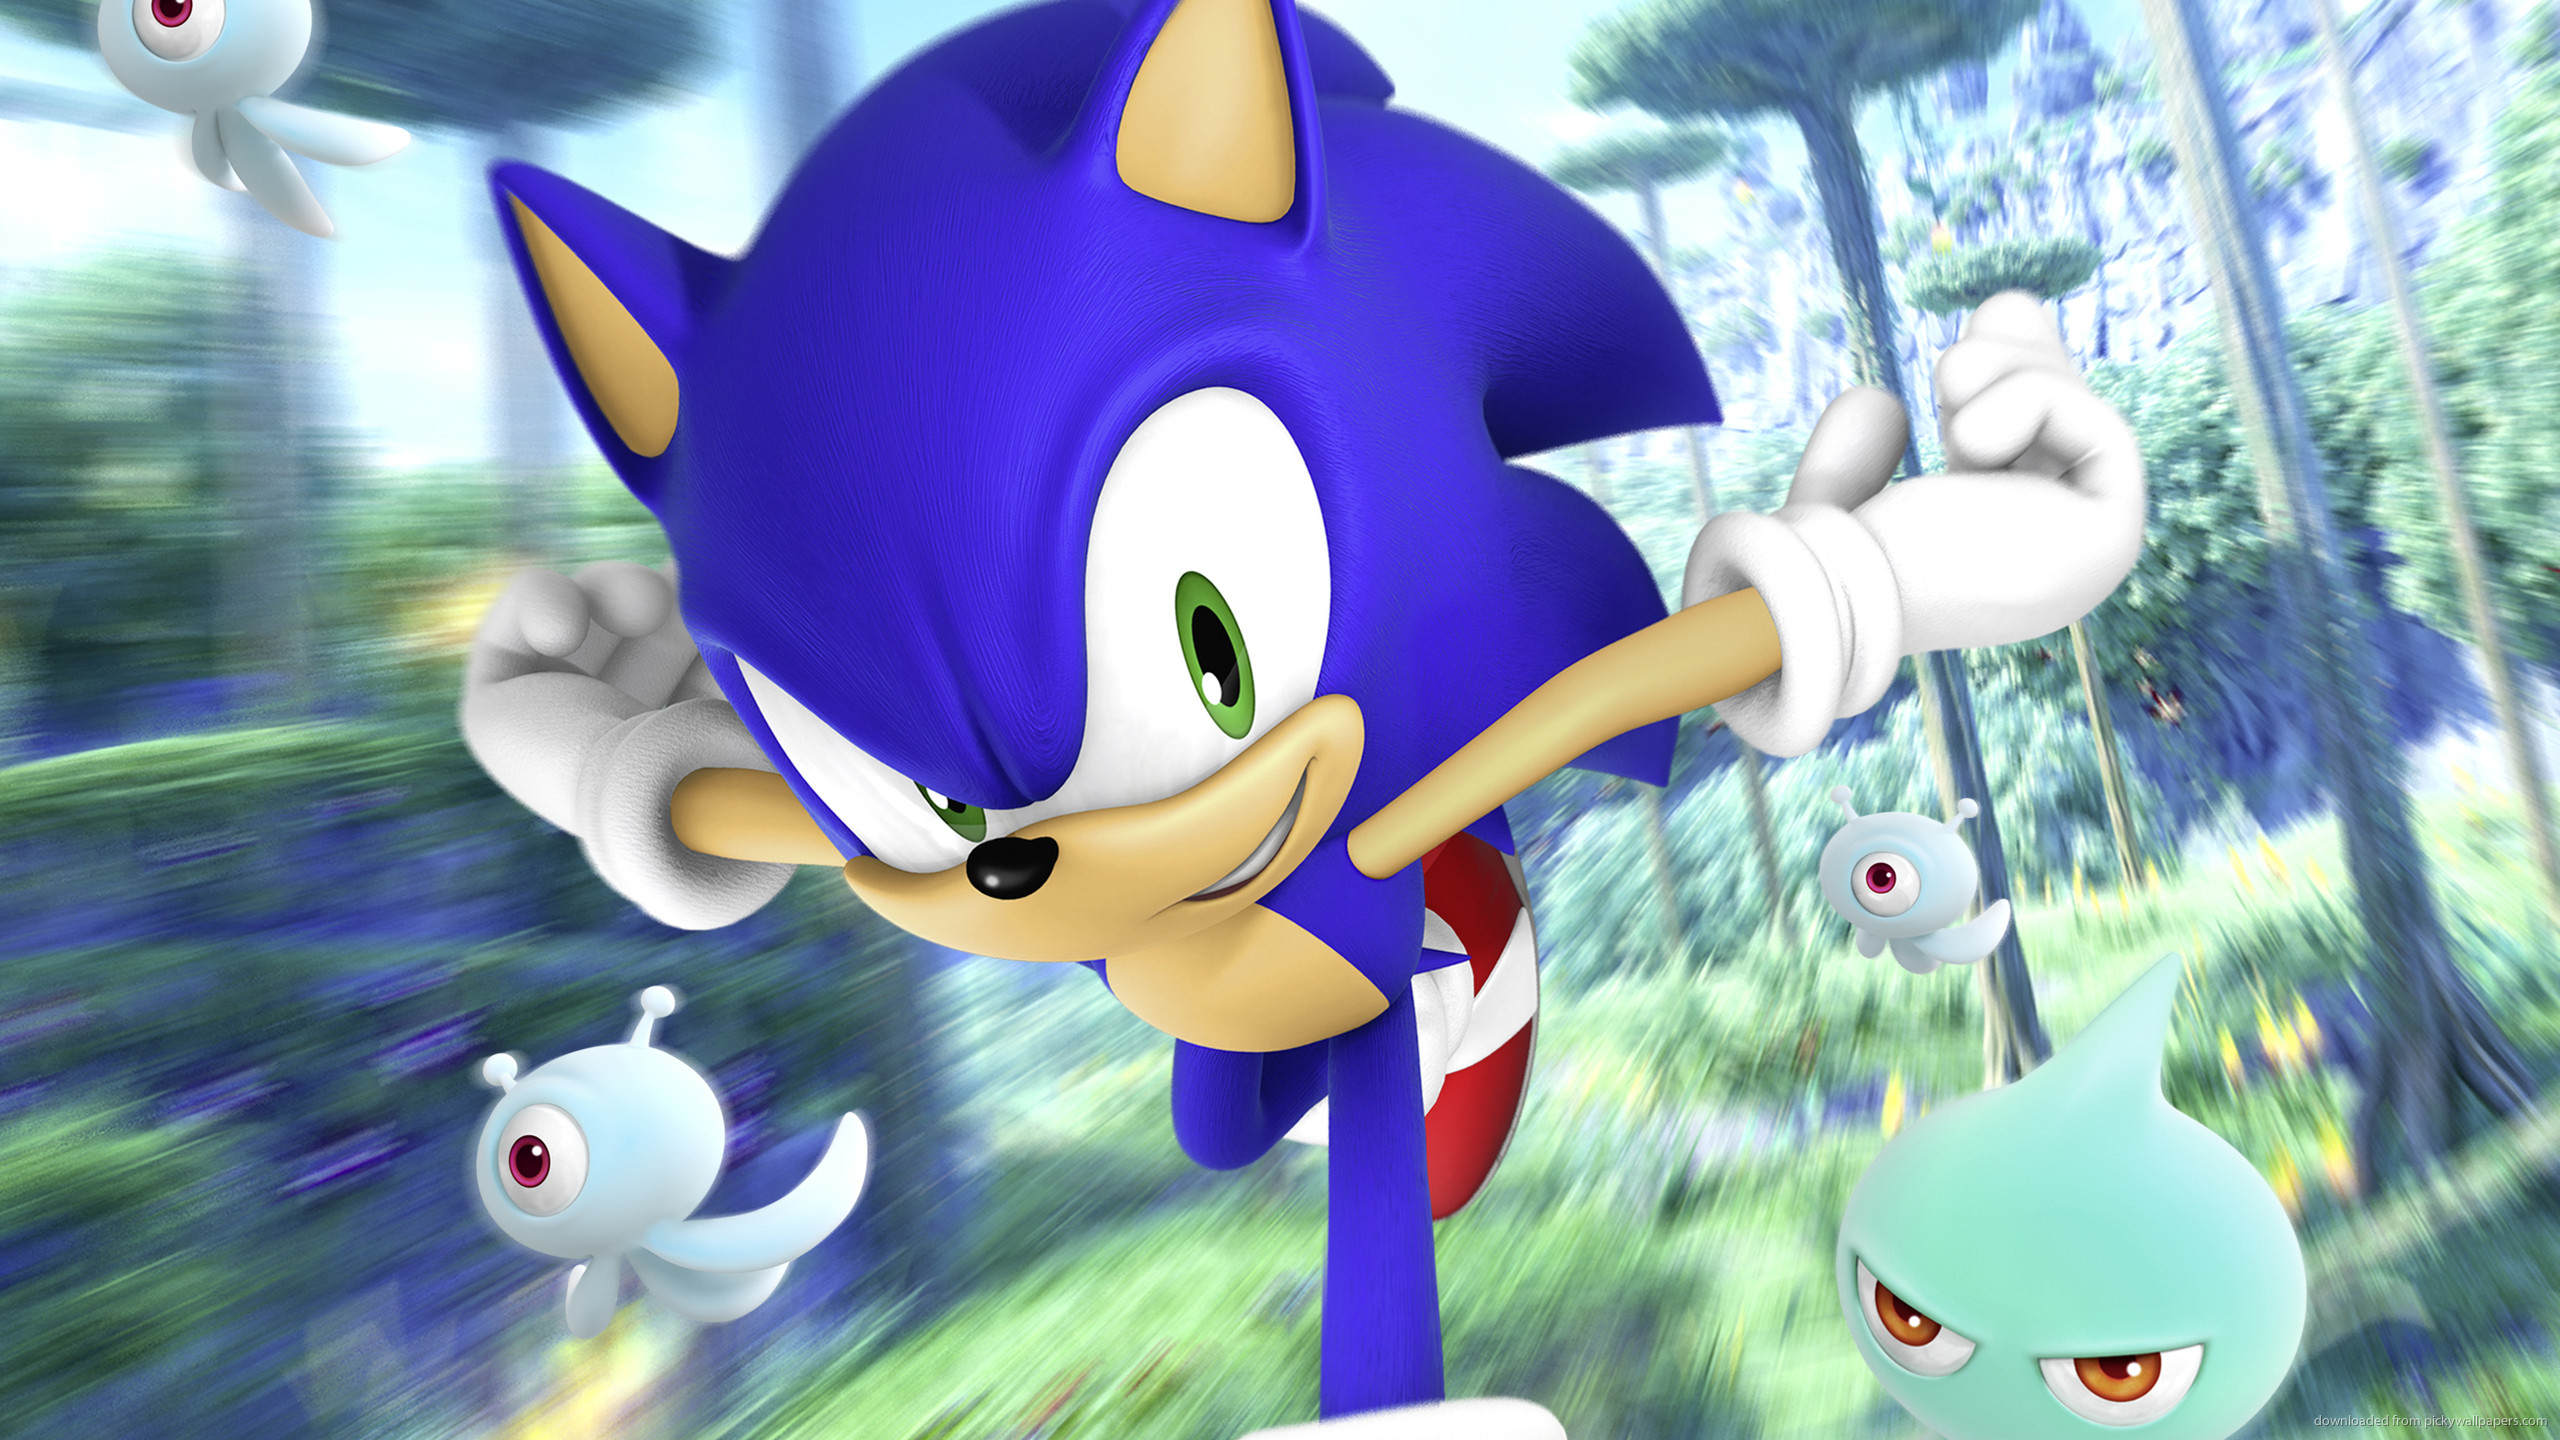 Sonic the Hedgehog Wallpaper 2018 (53+ images)2560 x 1440